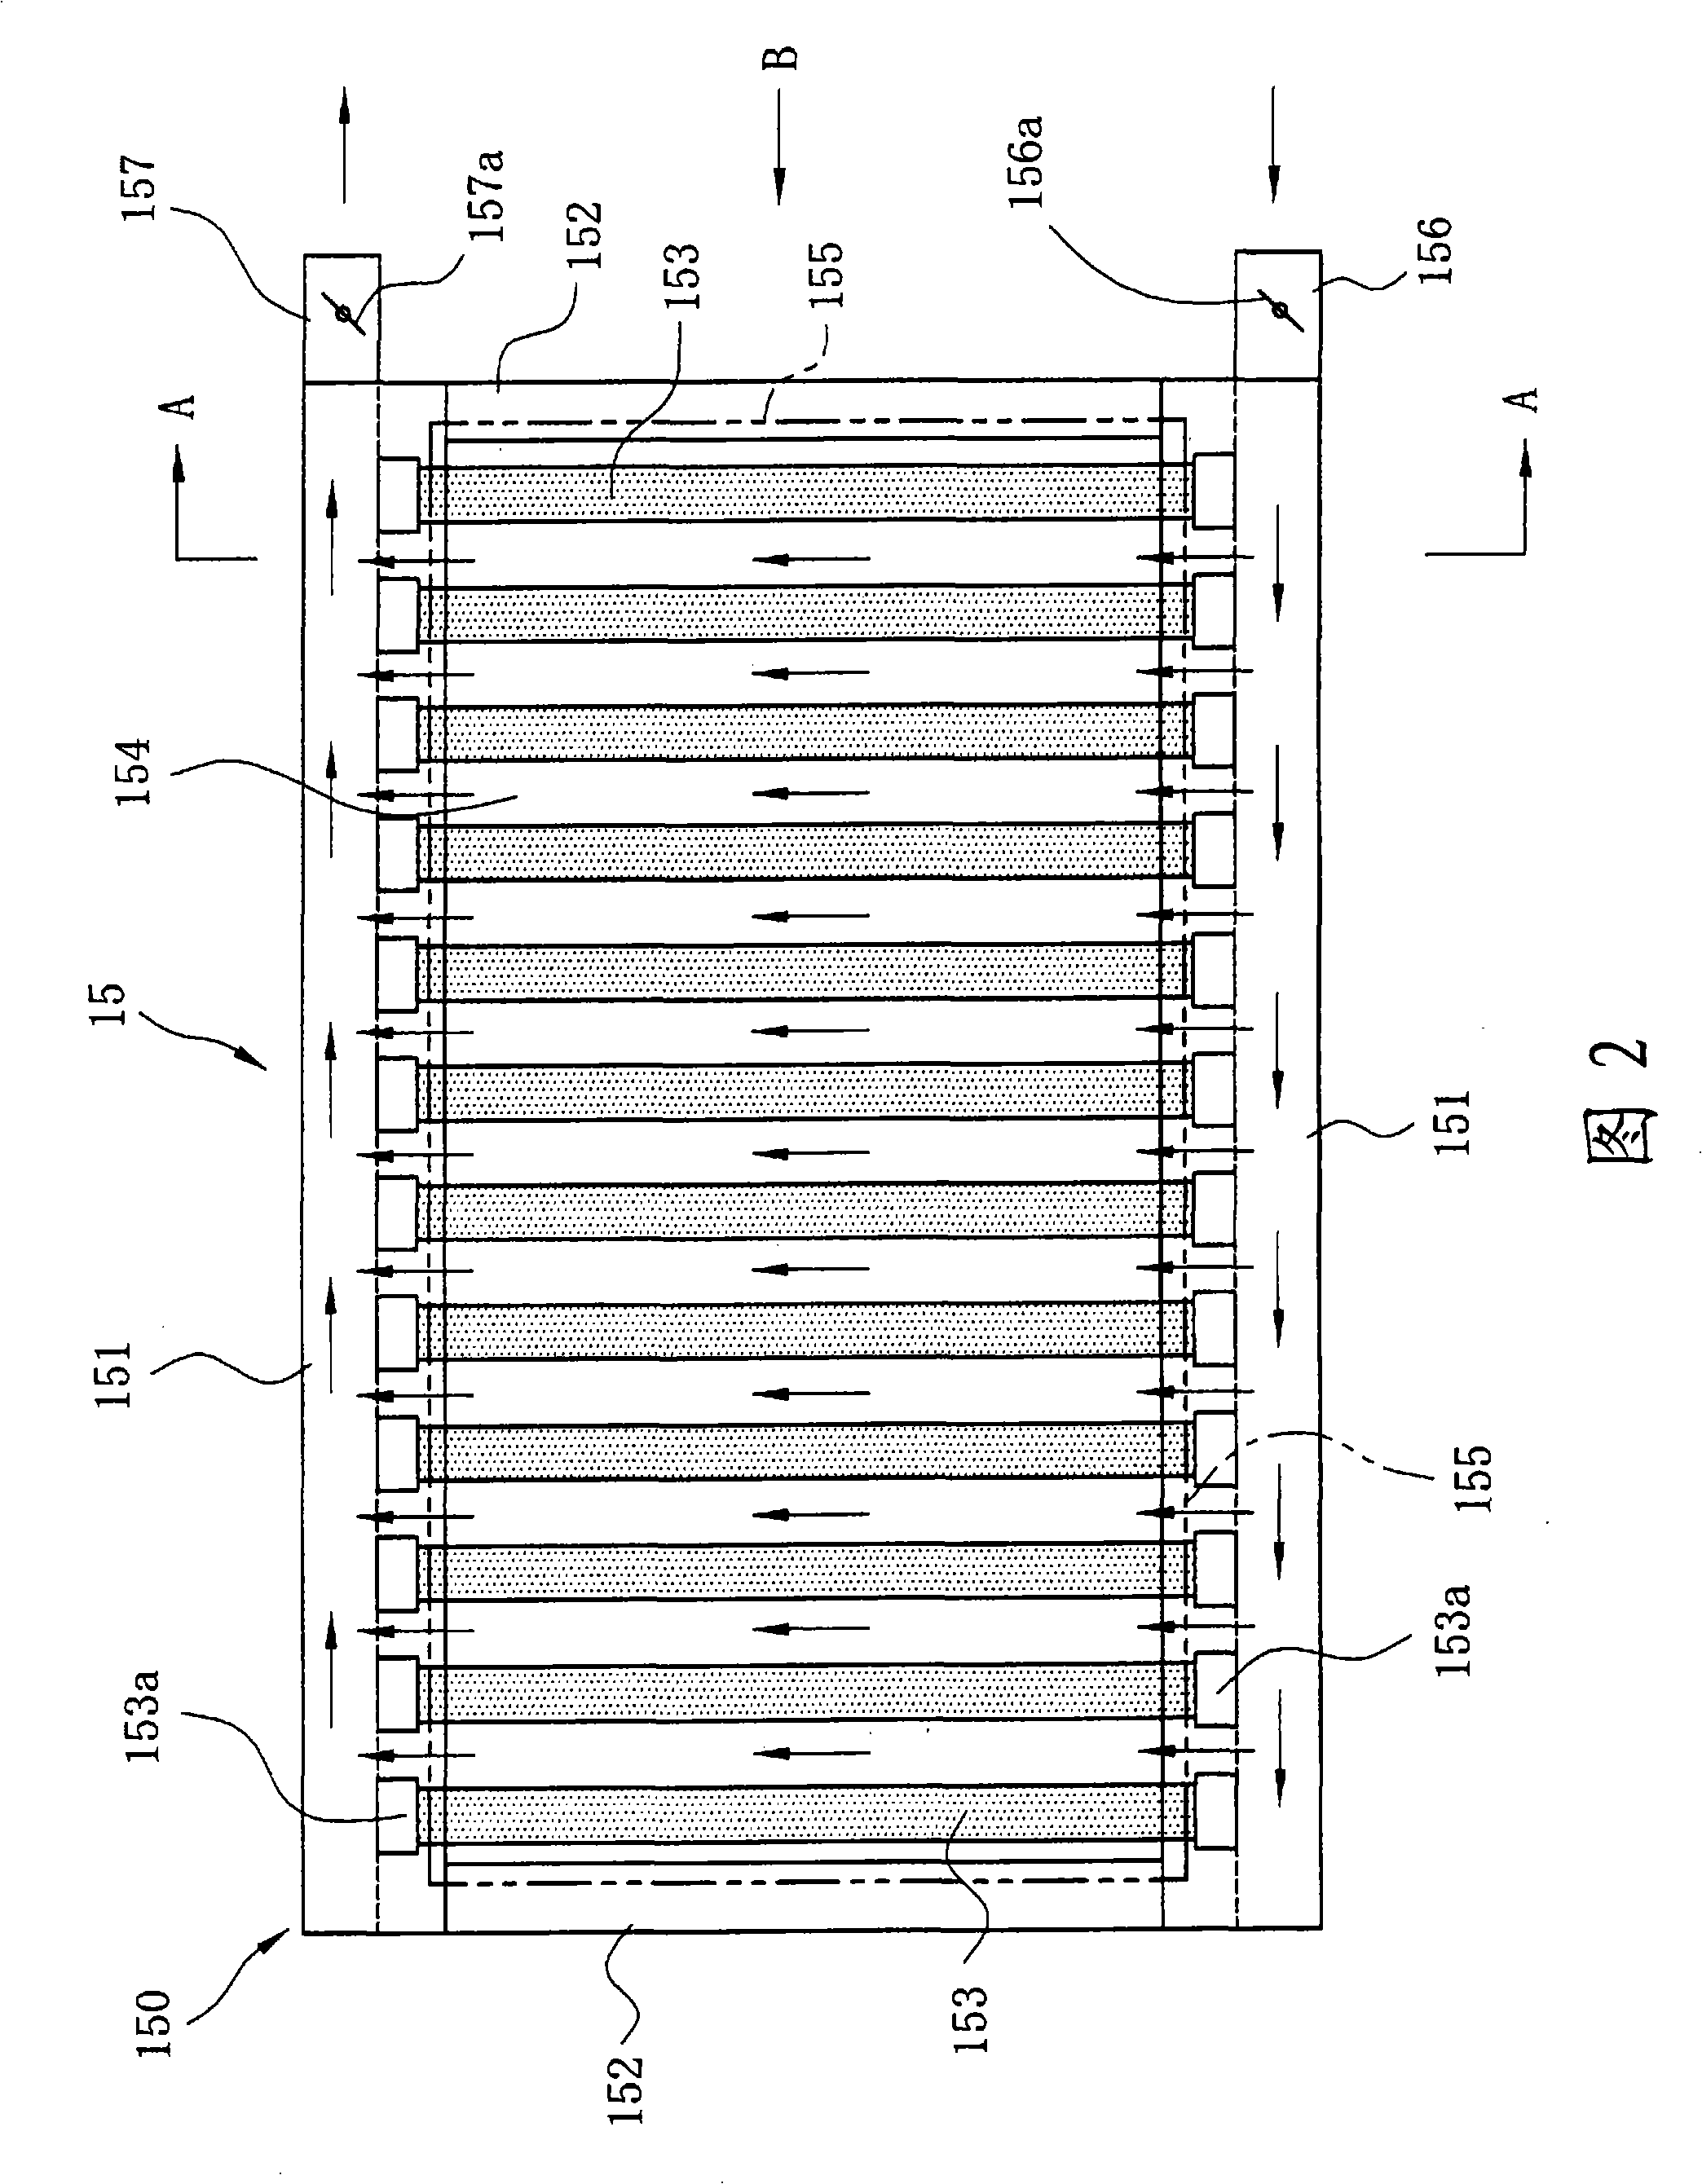 Bleaching/reforming apparatus for fiber and fiber structure